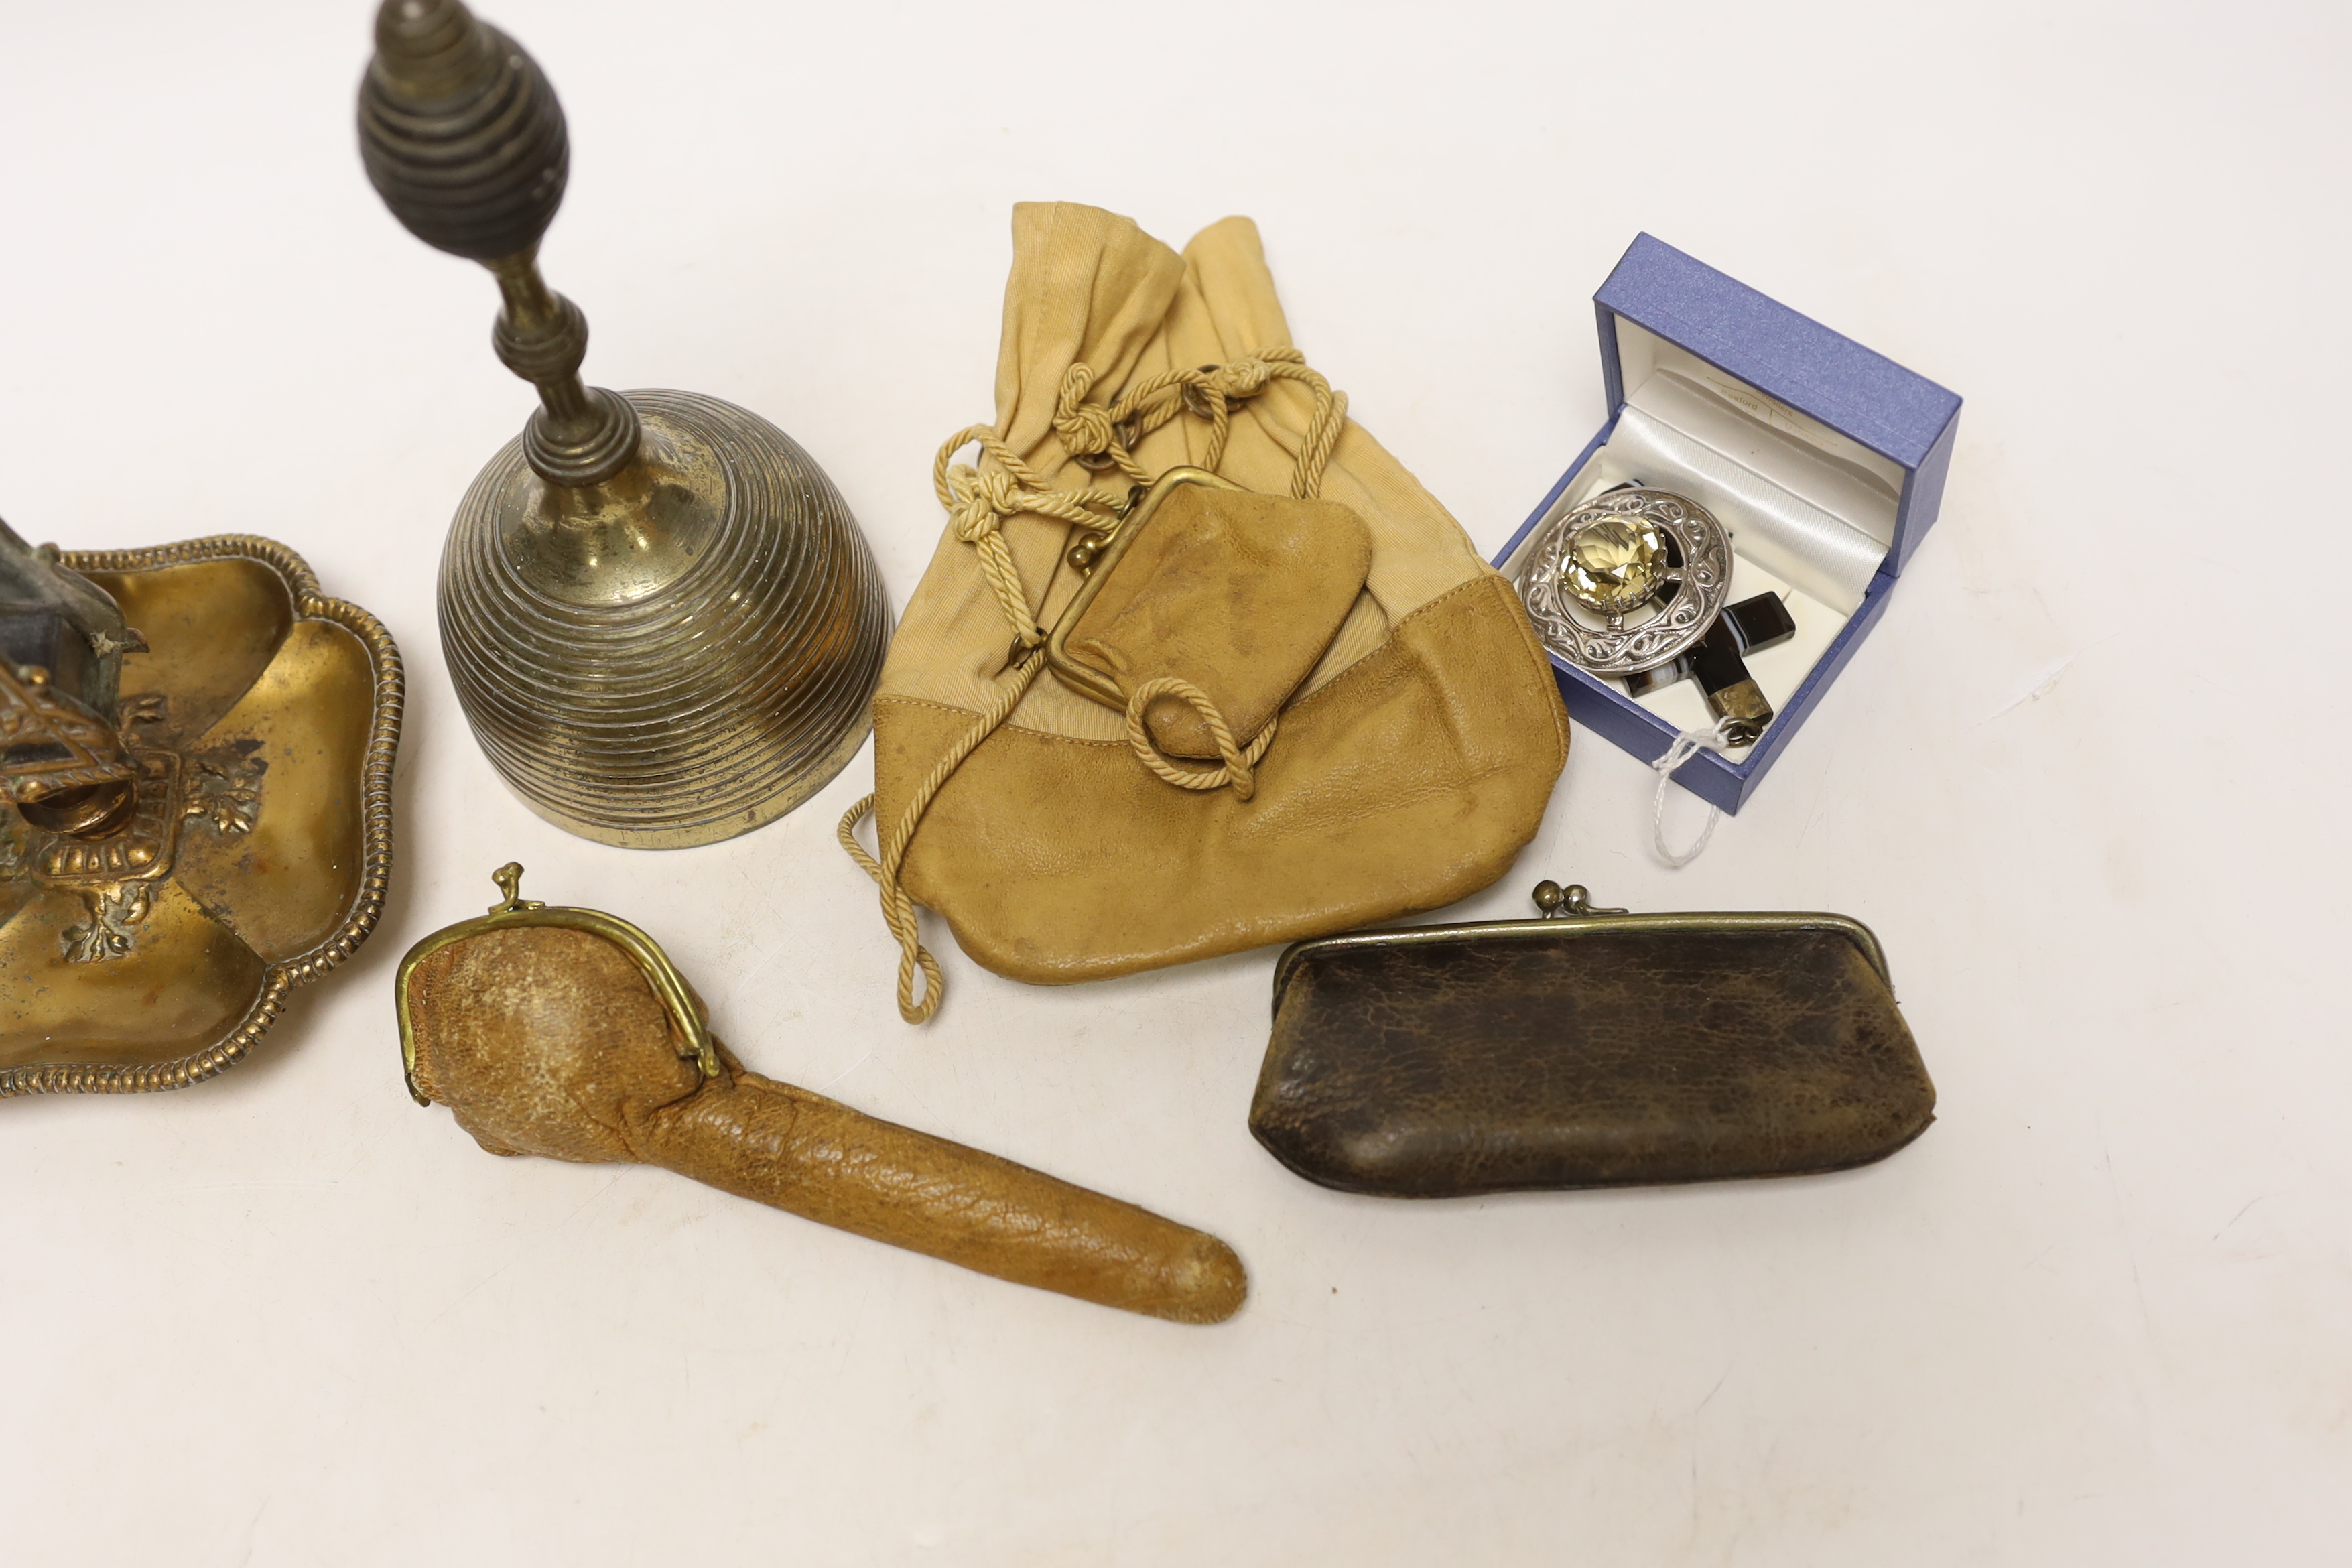 A group of collectables including a bell, a matchbox holder, a pendant, a brooch, etc.